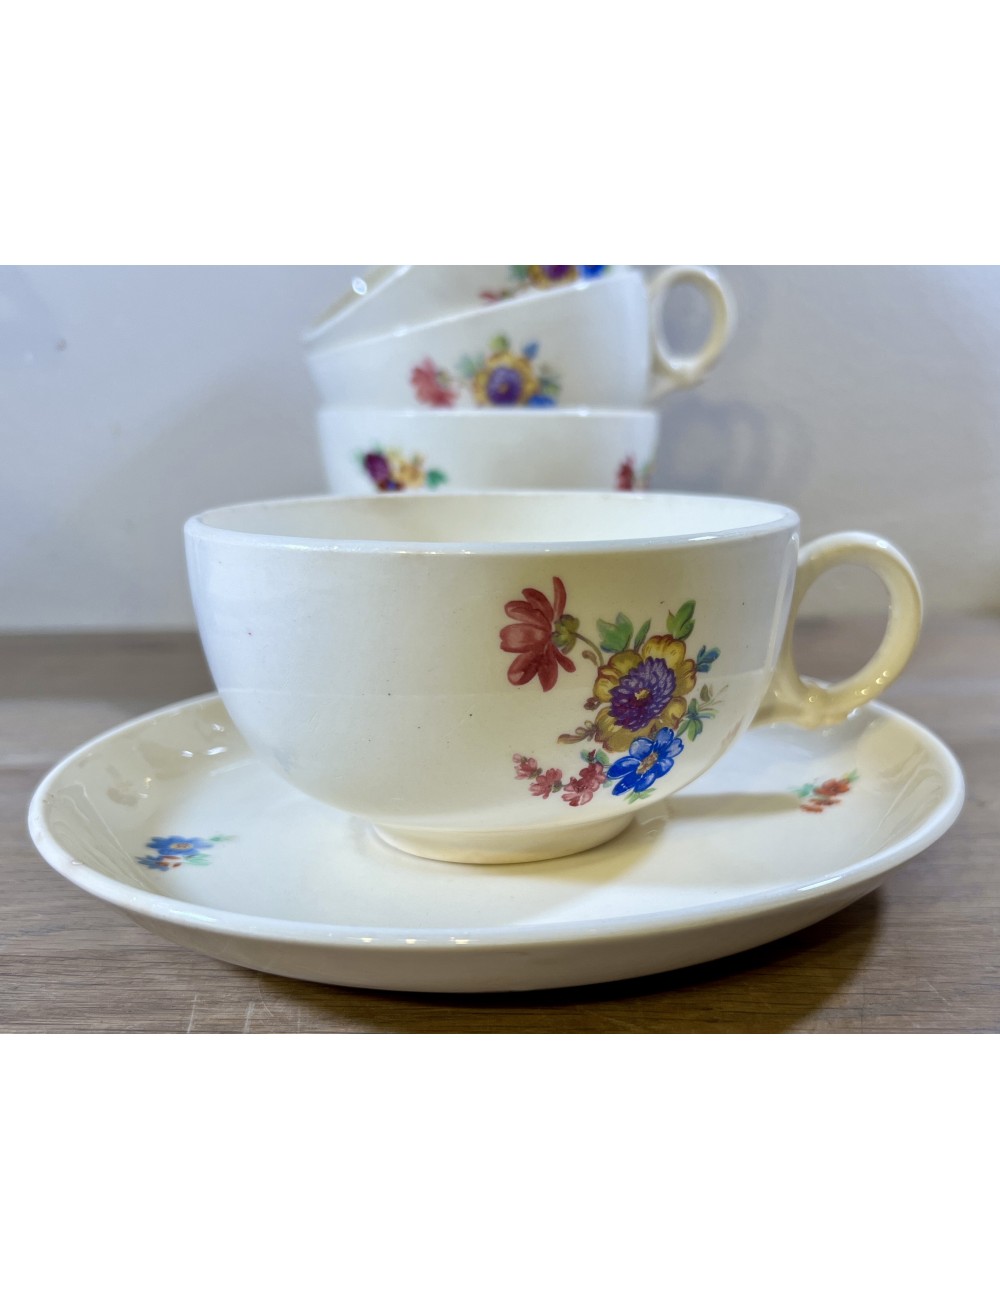 Cup and saucer - larger model - unmarked but Petrus Regout - shape BOUDEWIJN(?) - décor with colored flowers